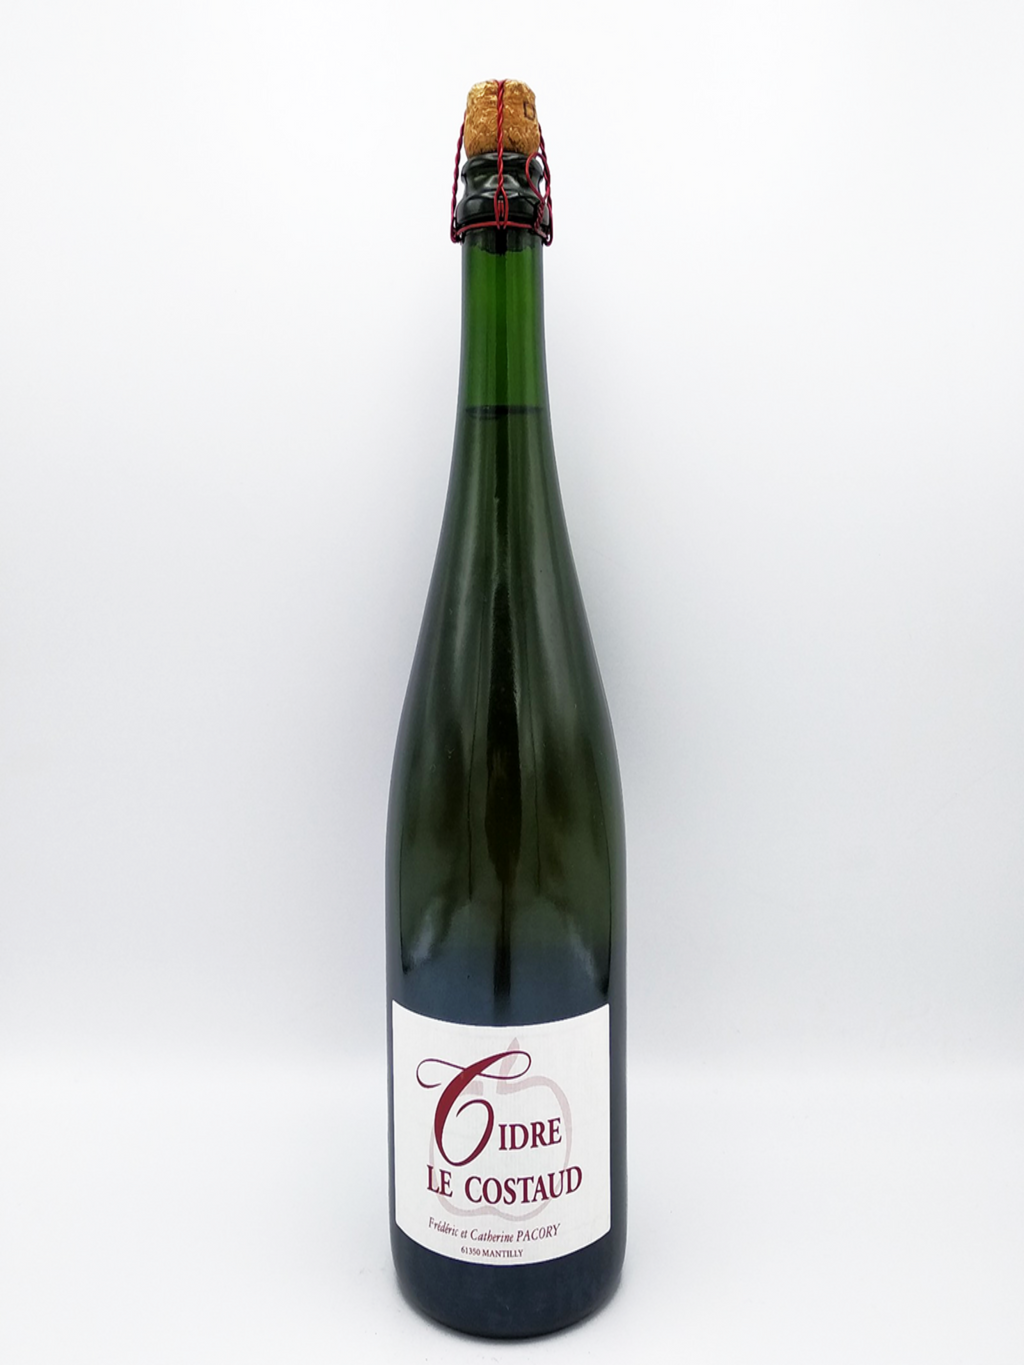 Cider "Le Costaud" 75cl - Pacory